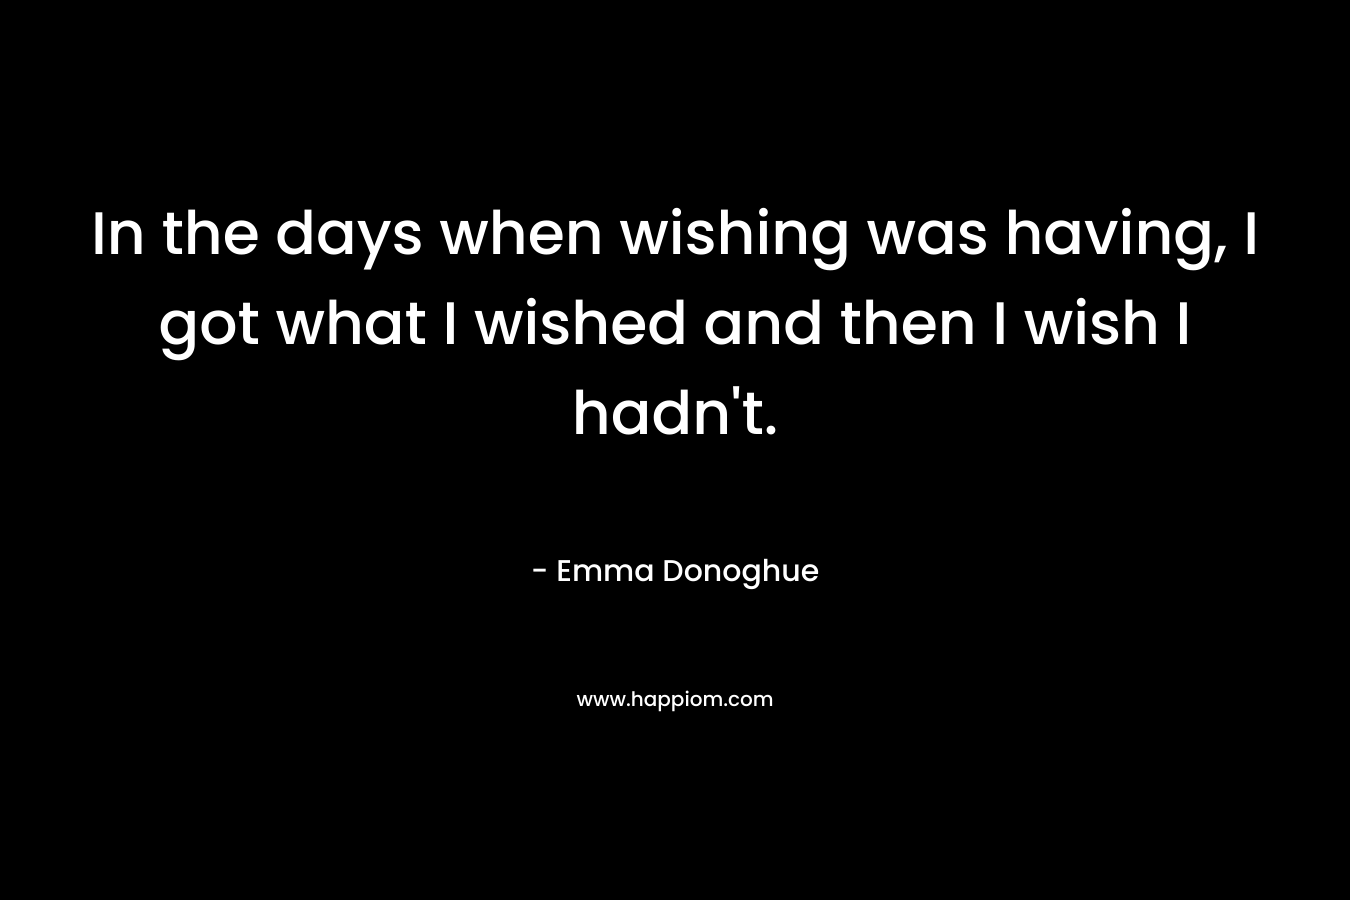 In the days when wishing was having, I got what I wished and then I wish I hadn’t. – Emma Donoghue